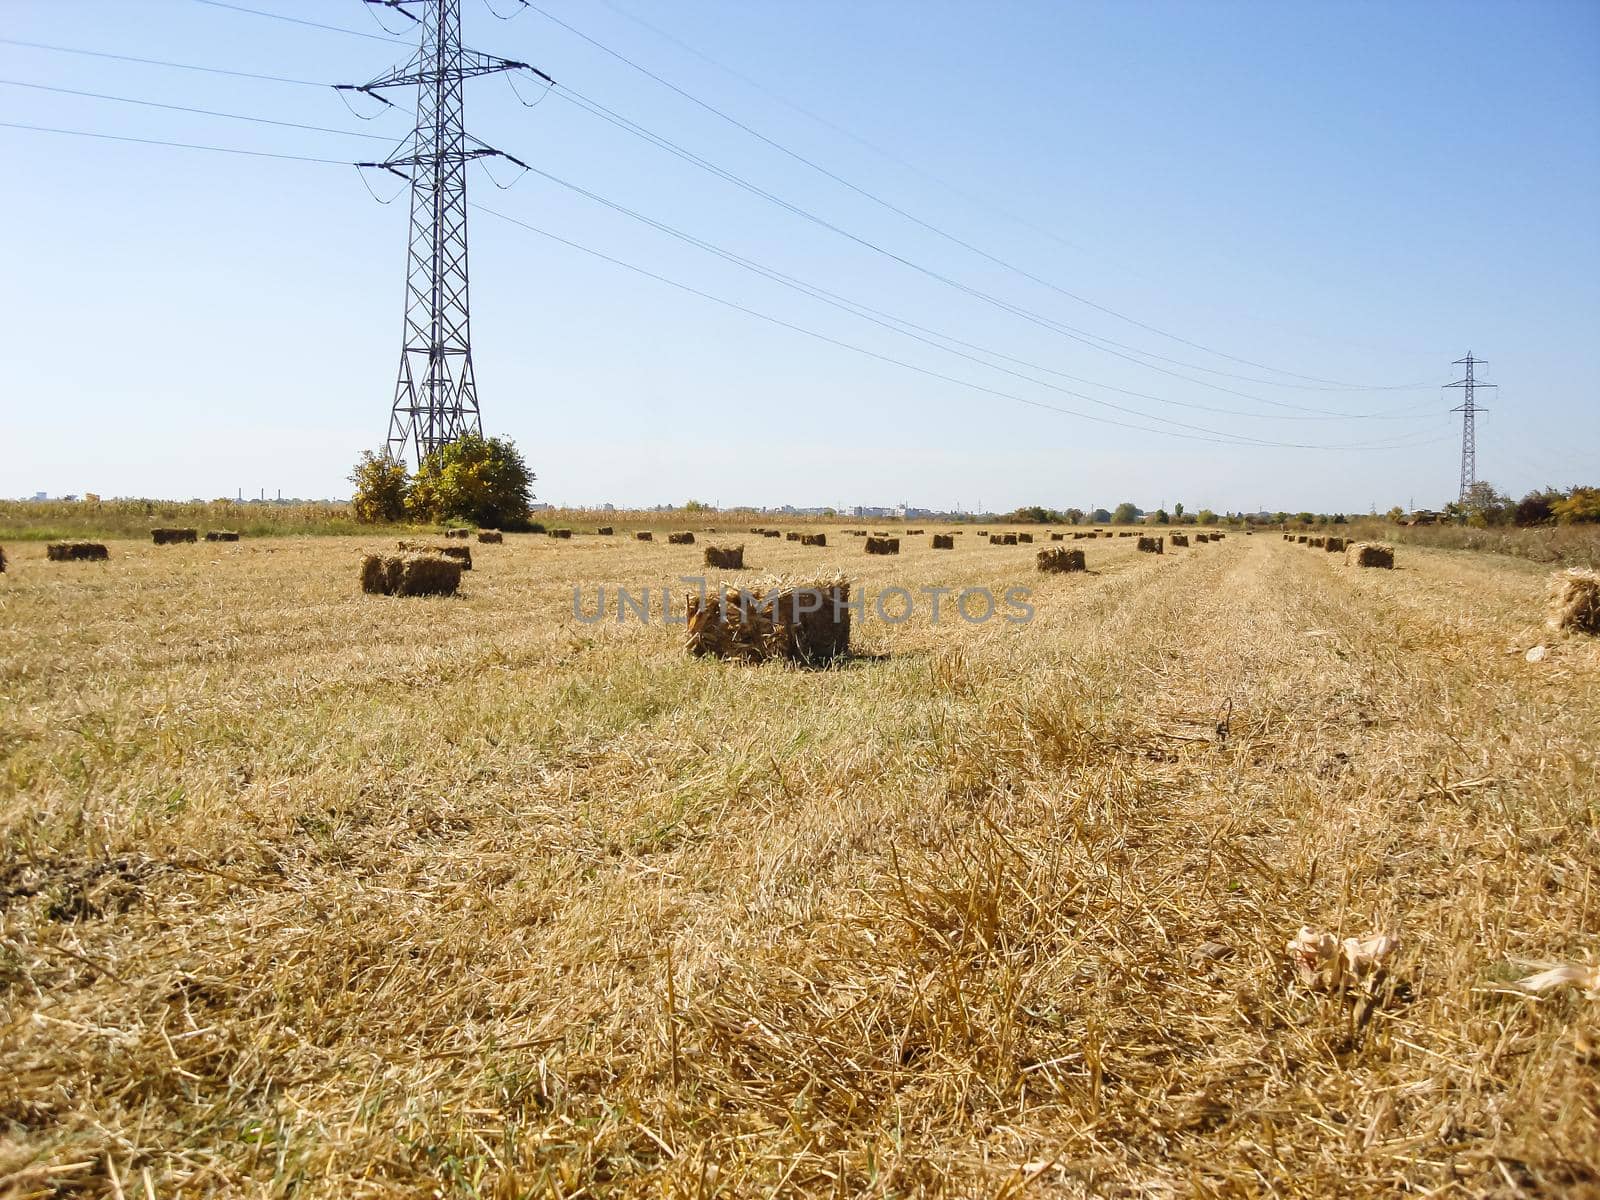 Agricultural field with straw bales after harvest.